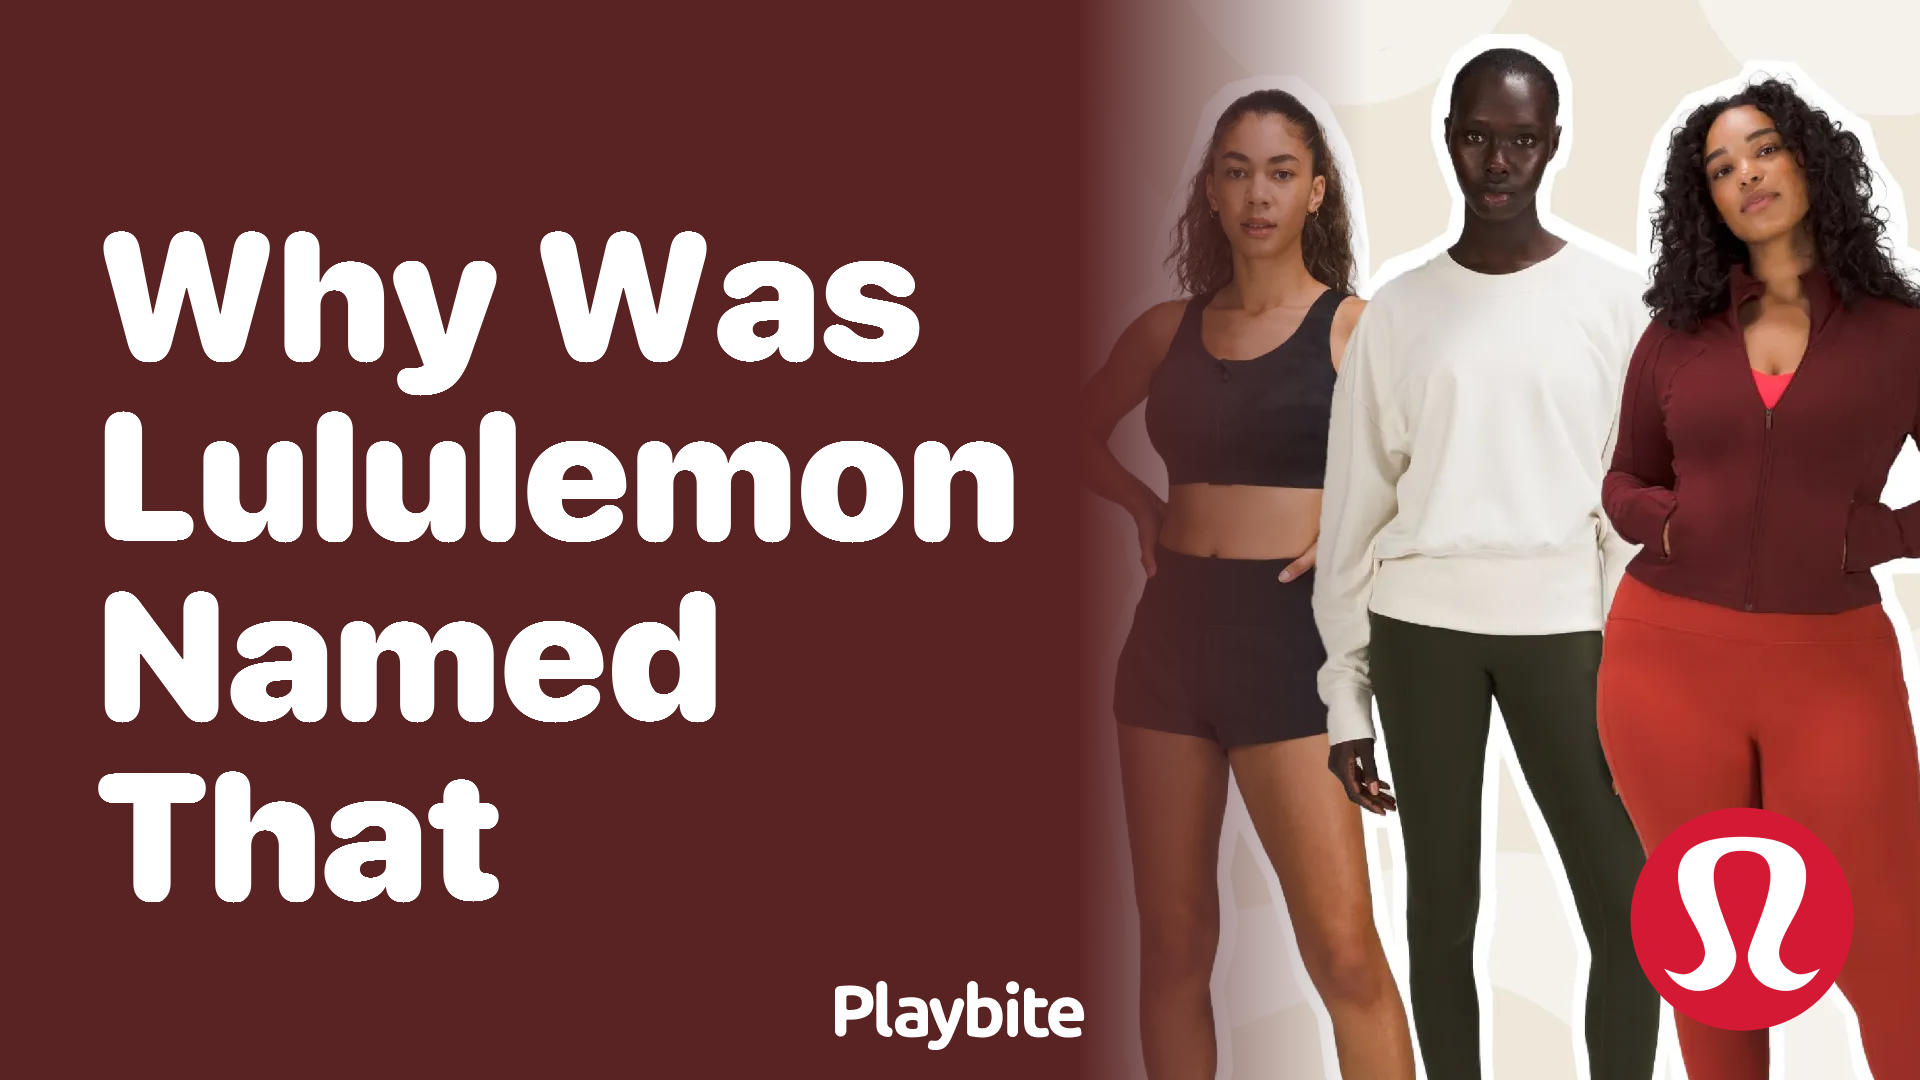 The Meaning behind The Name Lululemon